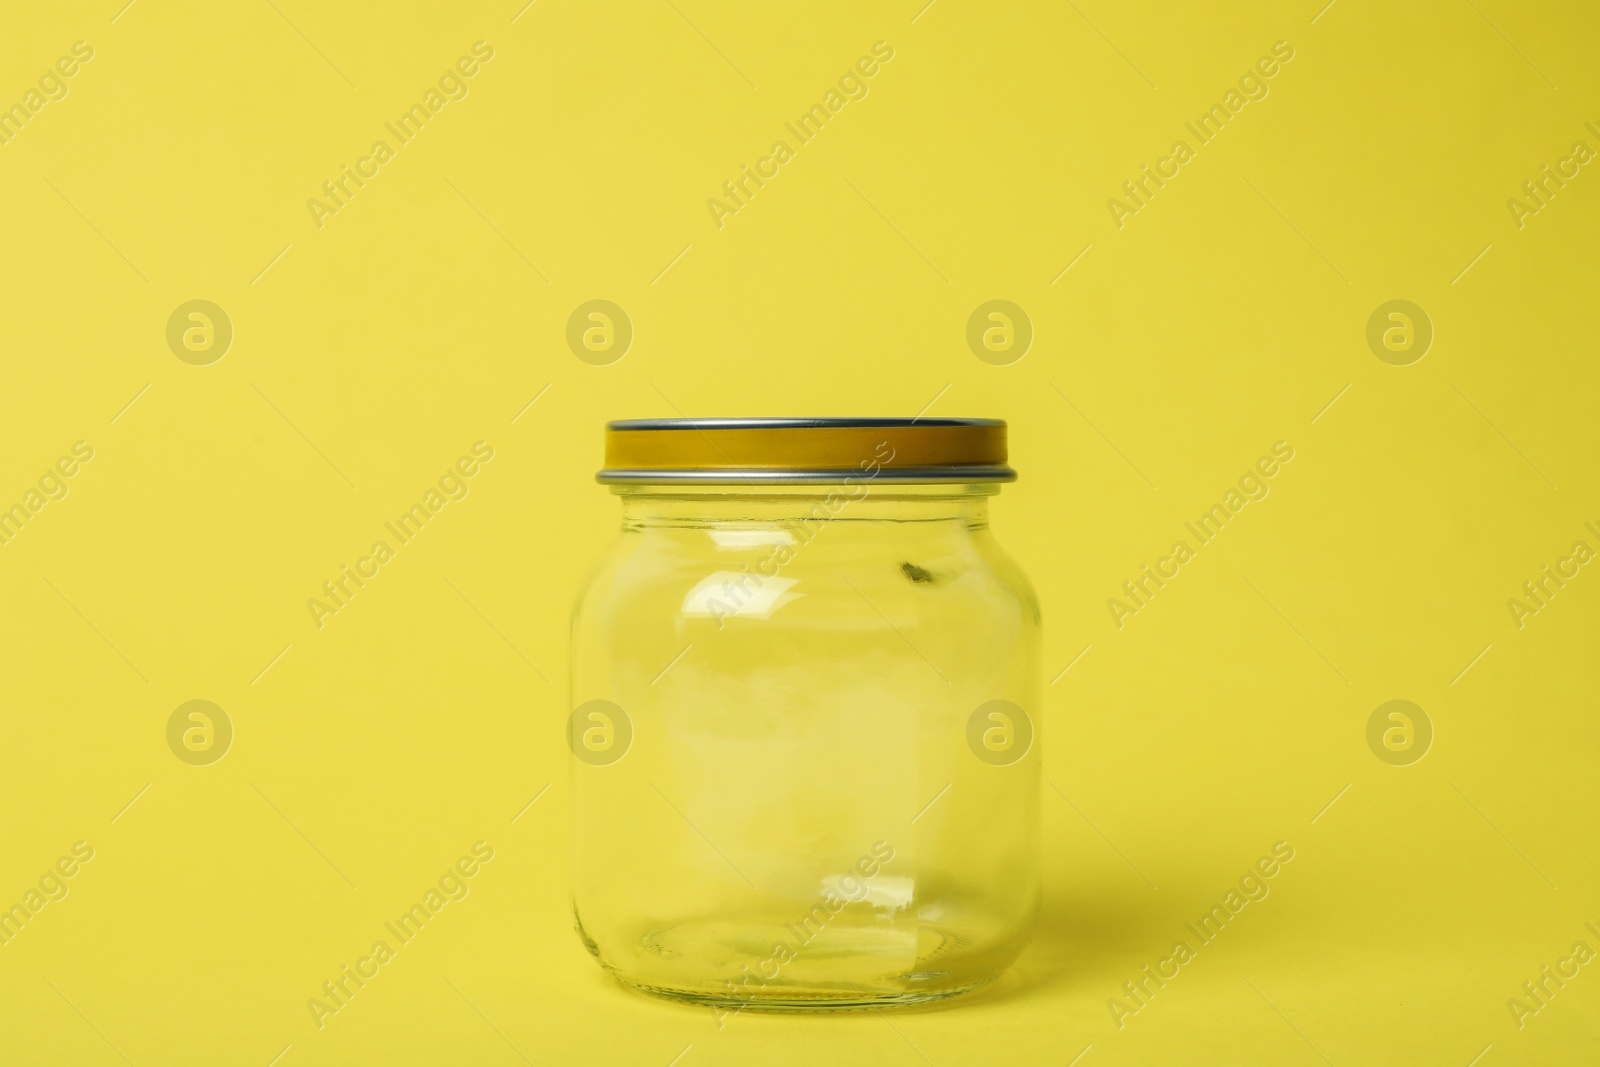 Photo of Closed empty glass jar on light yellow background